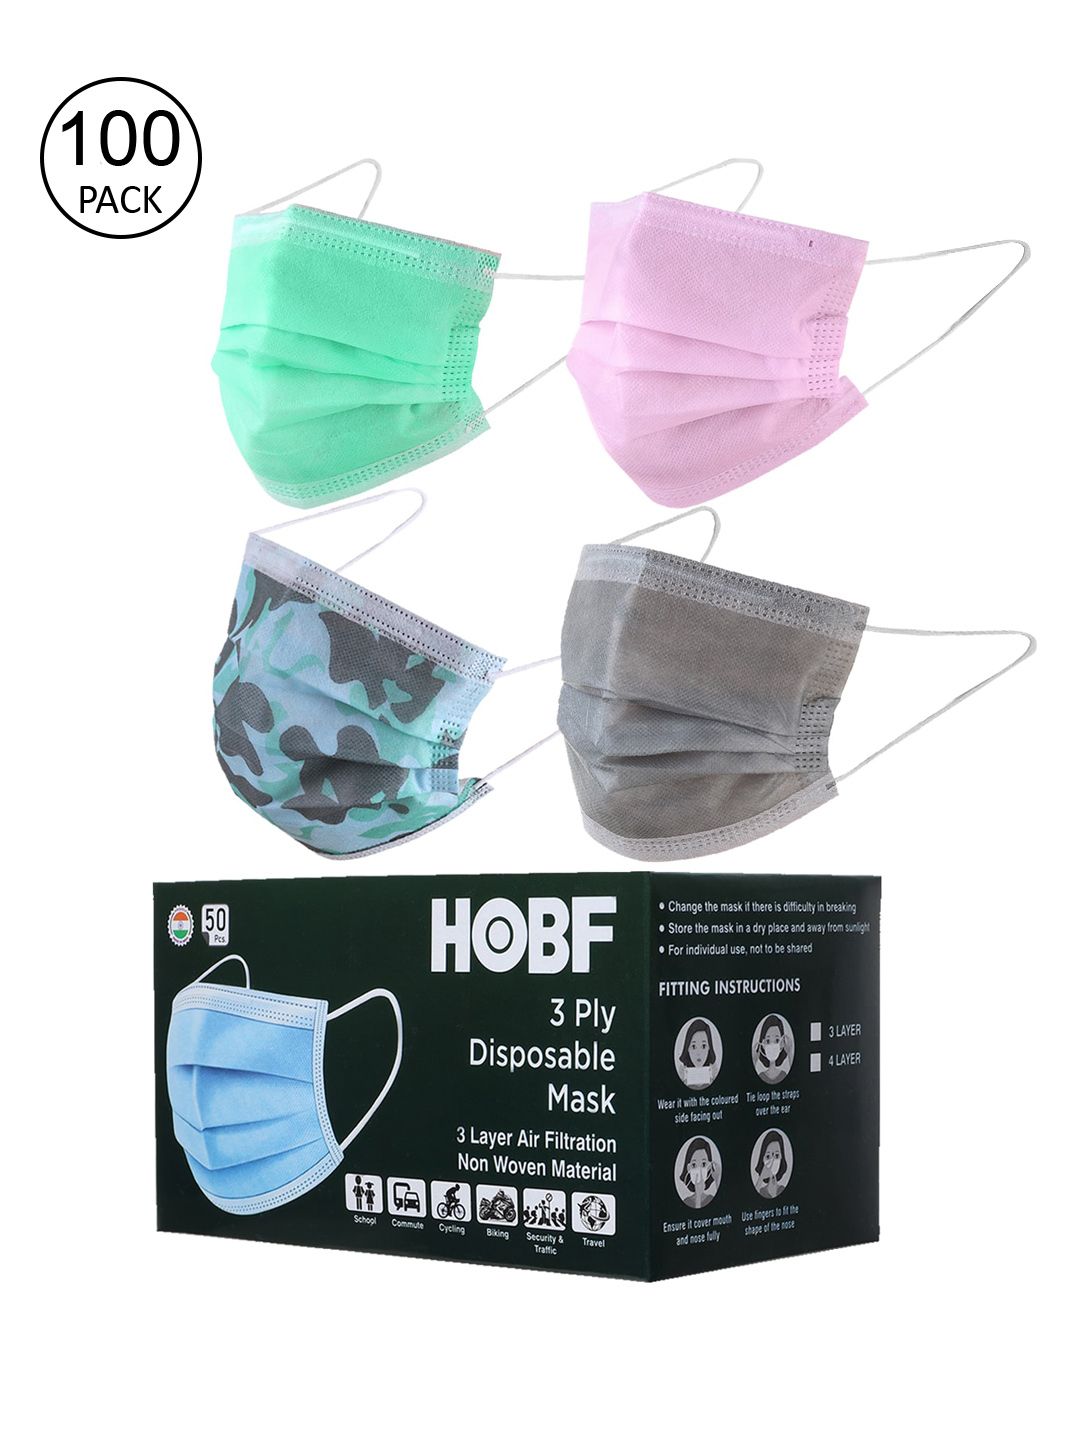 Swiss Design Pack Of 100 Assorted 3-Ply Surgical Masks With Nose-Pin Price in India